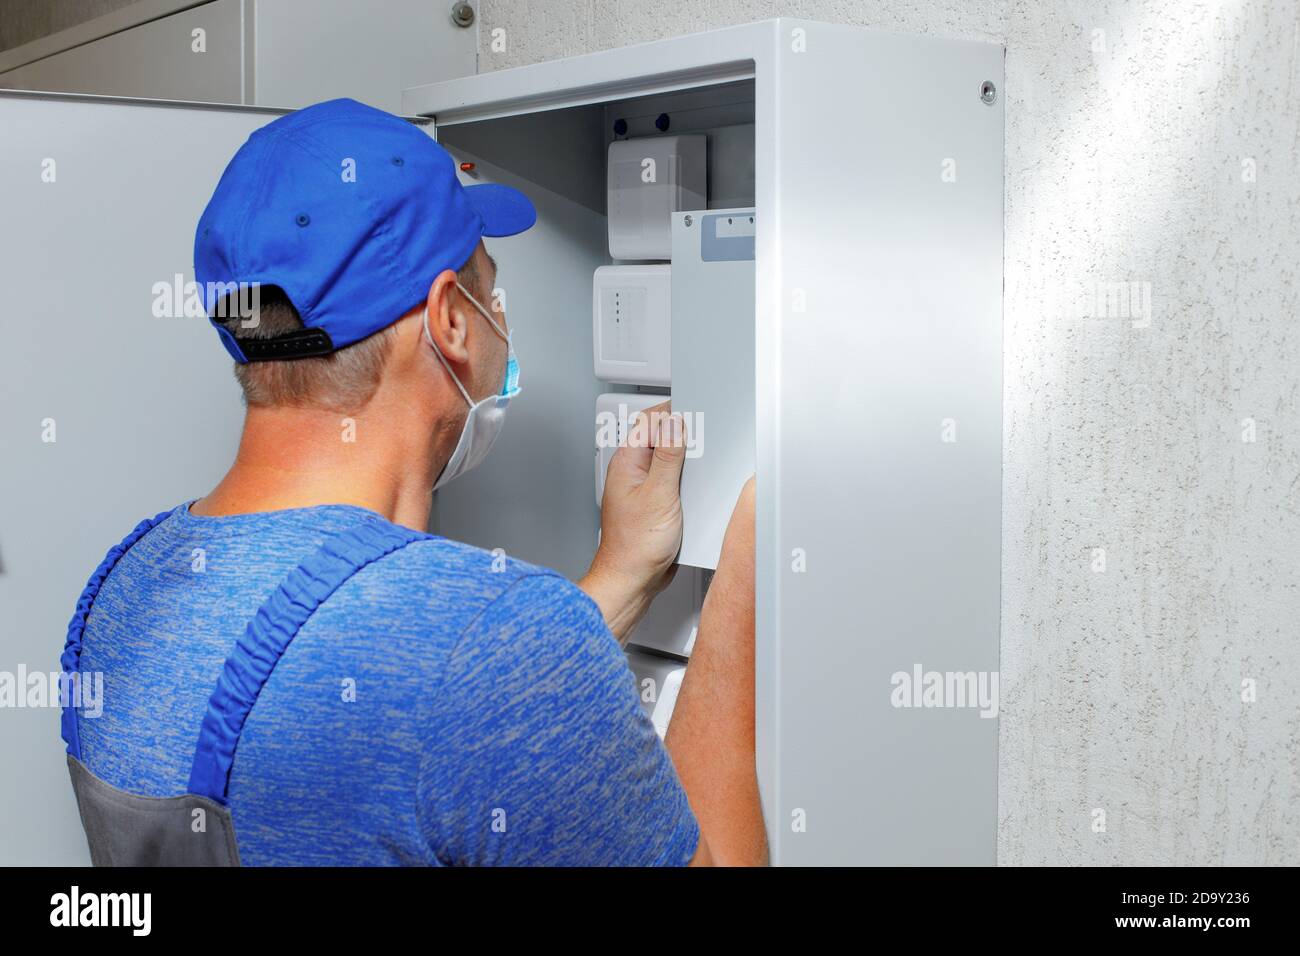 An electrician in overalls and a baseball cap examines a Cabinet with sensors and equipment.  Stock Photo